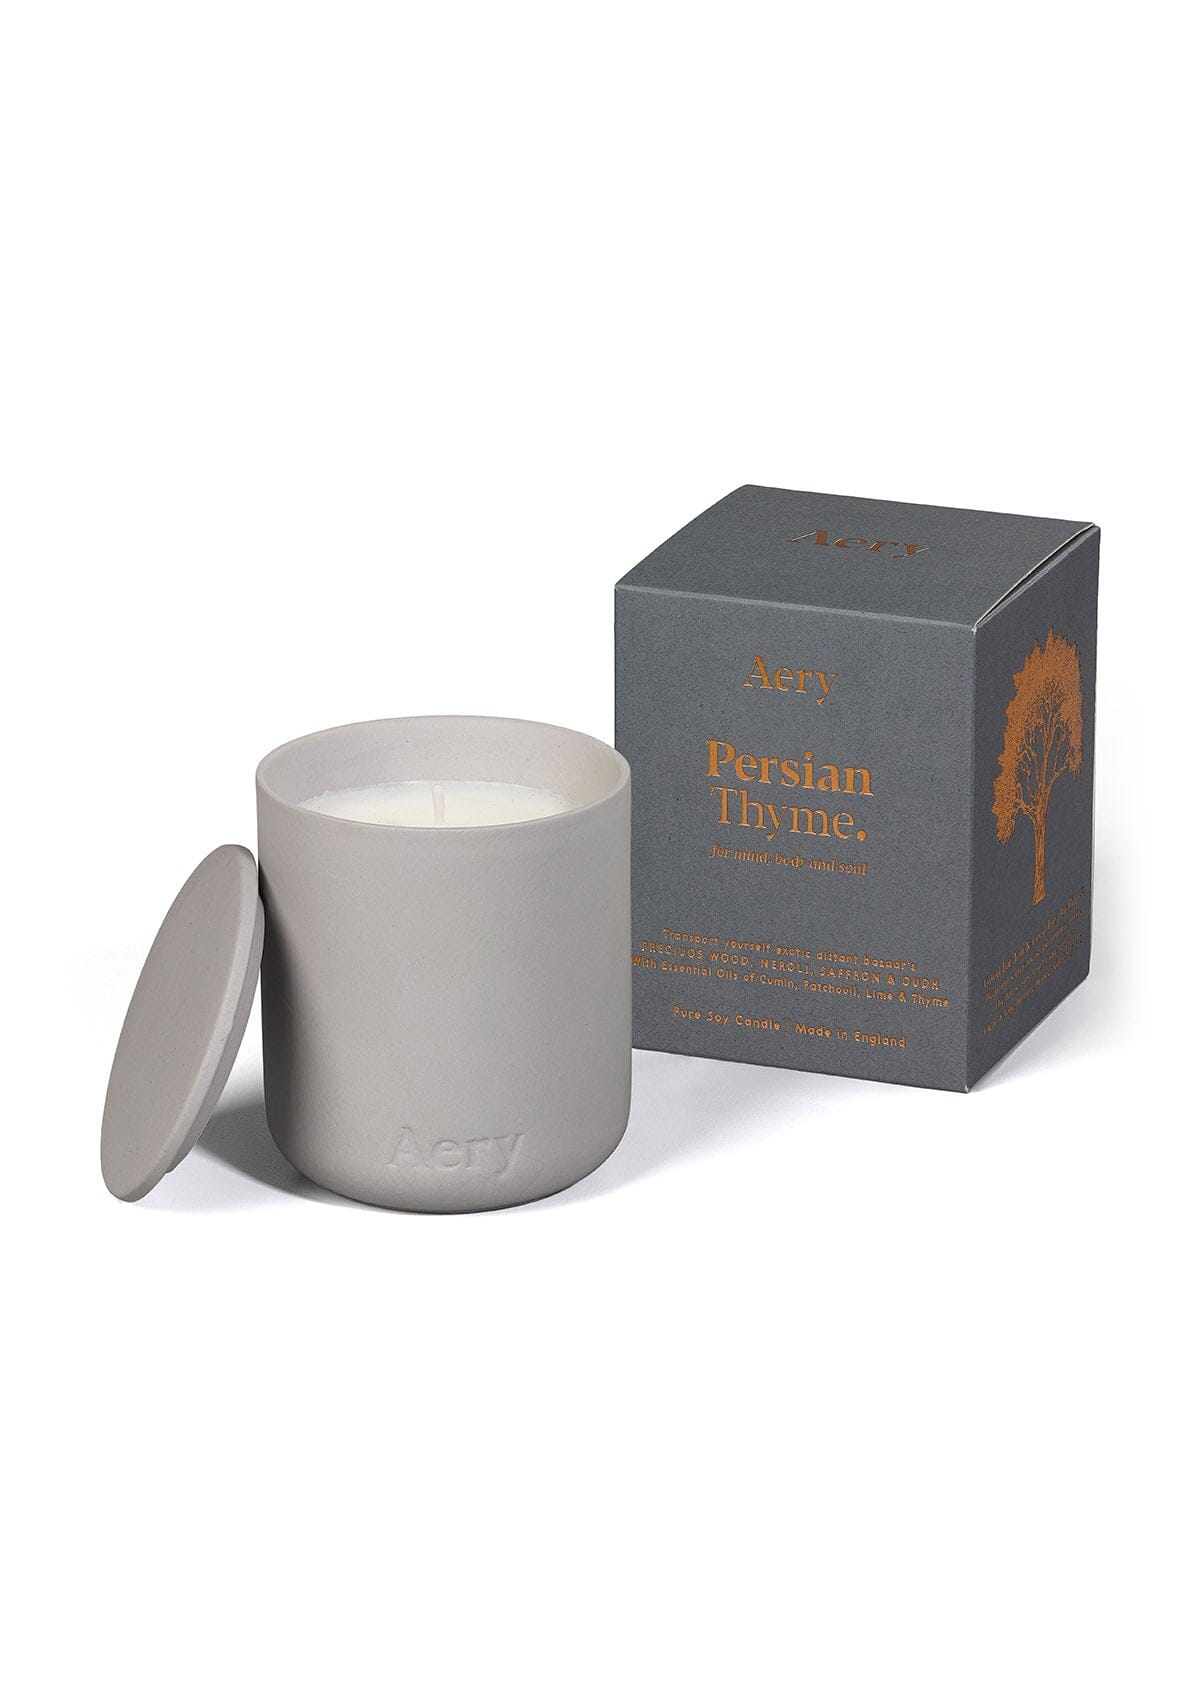 Aery - Persian Thyme Scented Candle